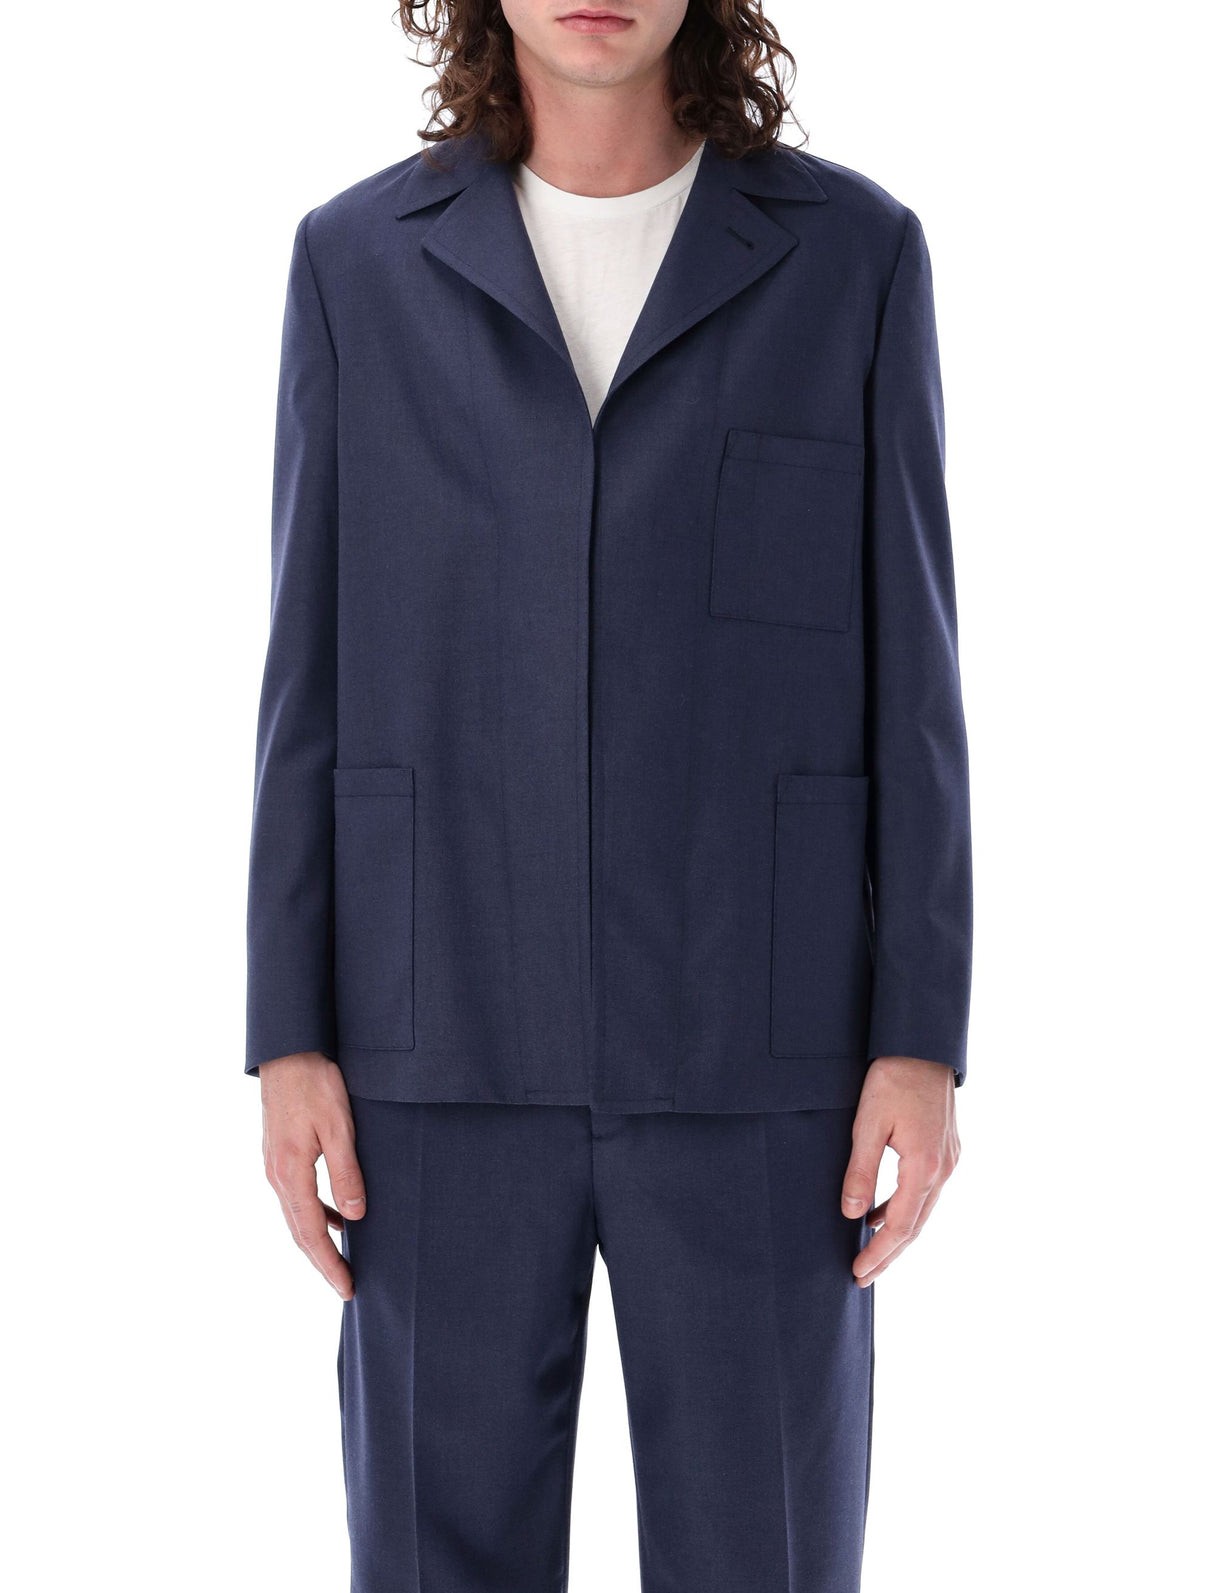 FENDI Men's Single-Breasted Wool Jacket in Mirto Blue - Spring/Summer '24 Collection